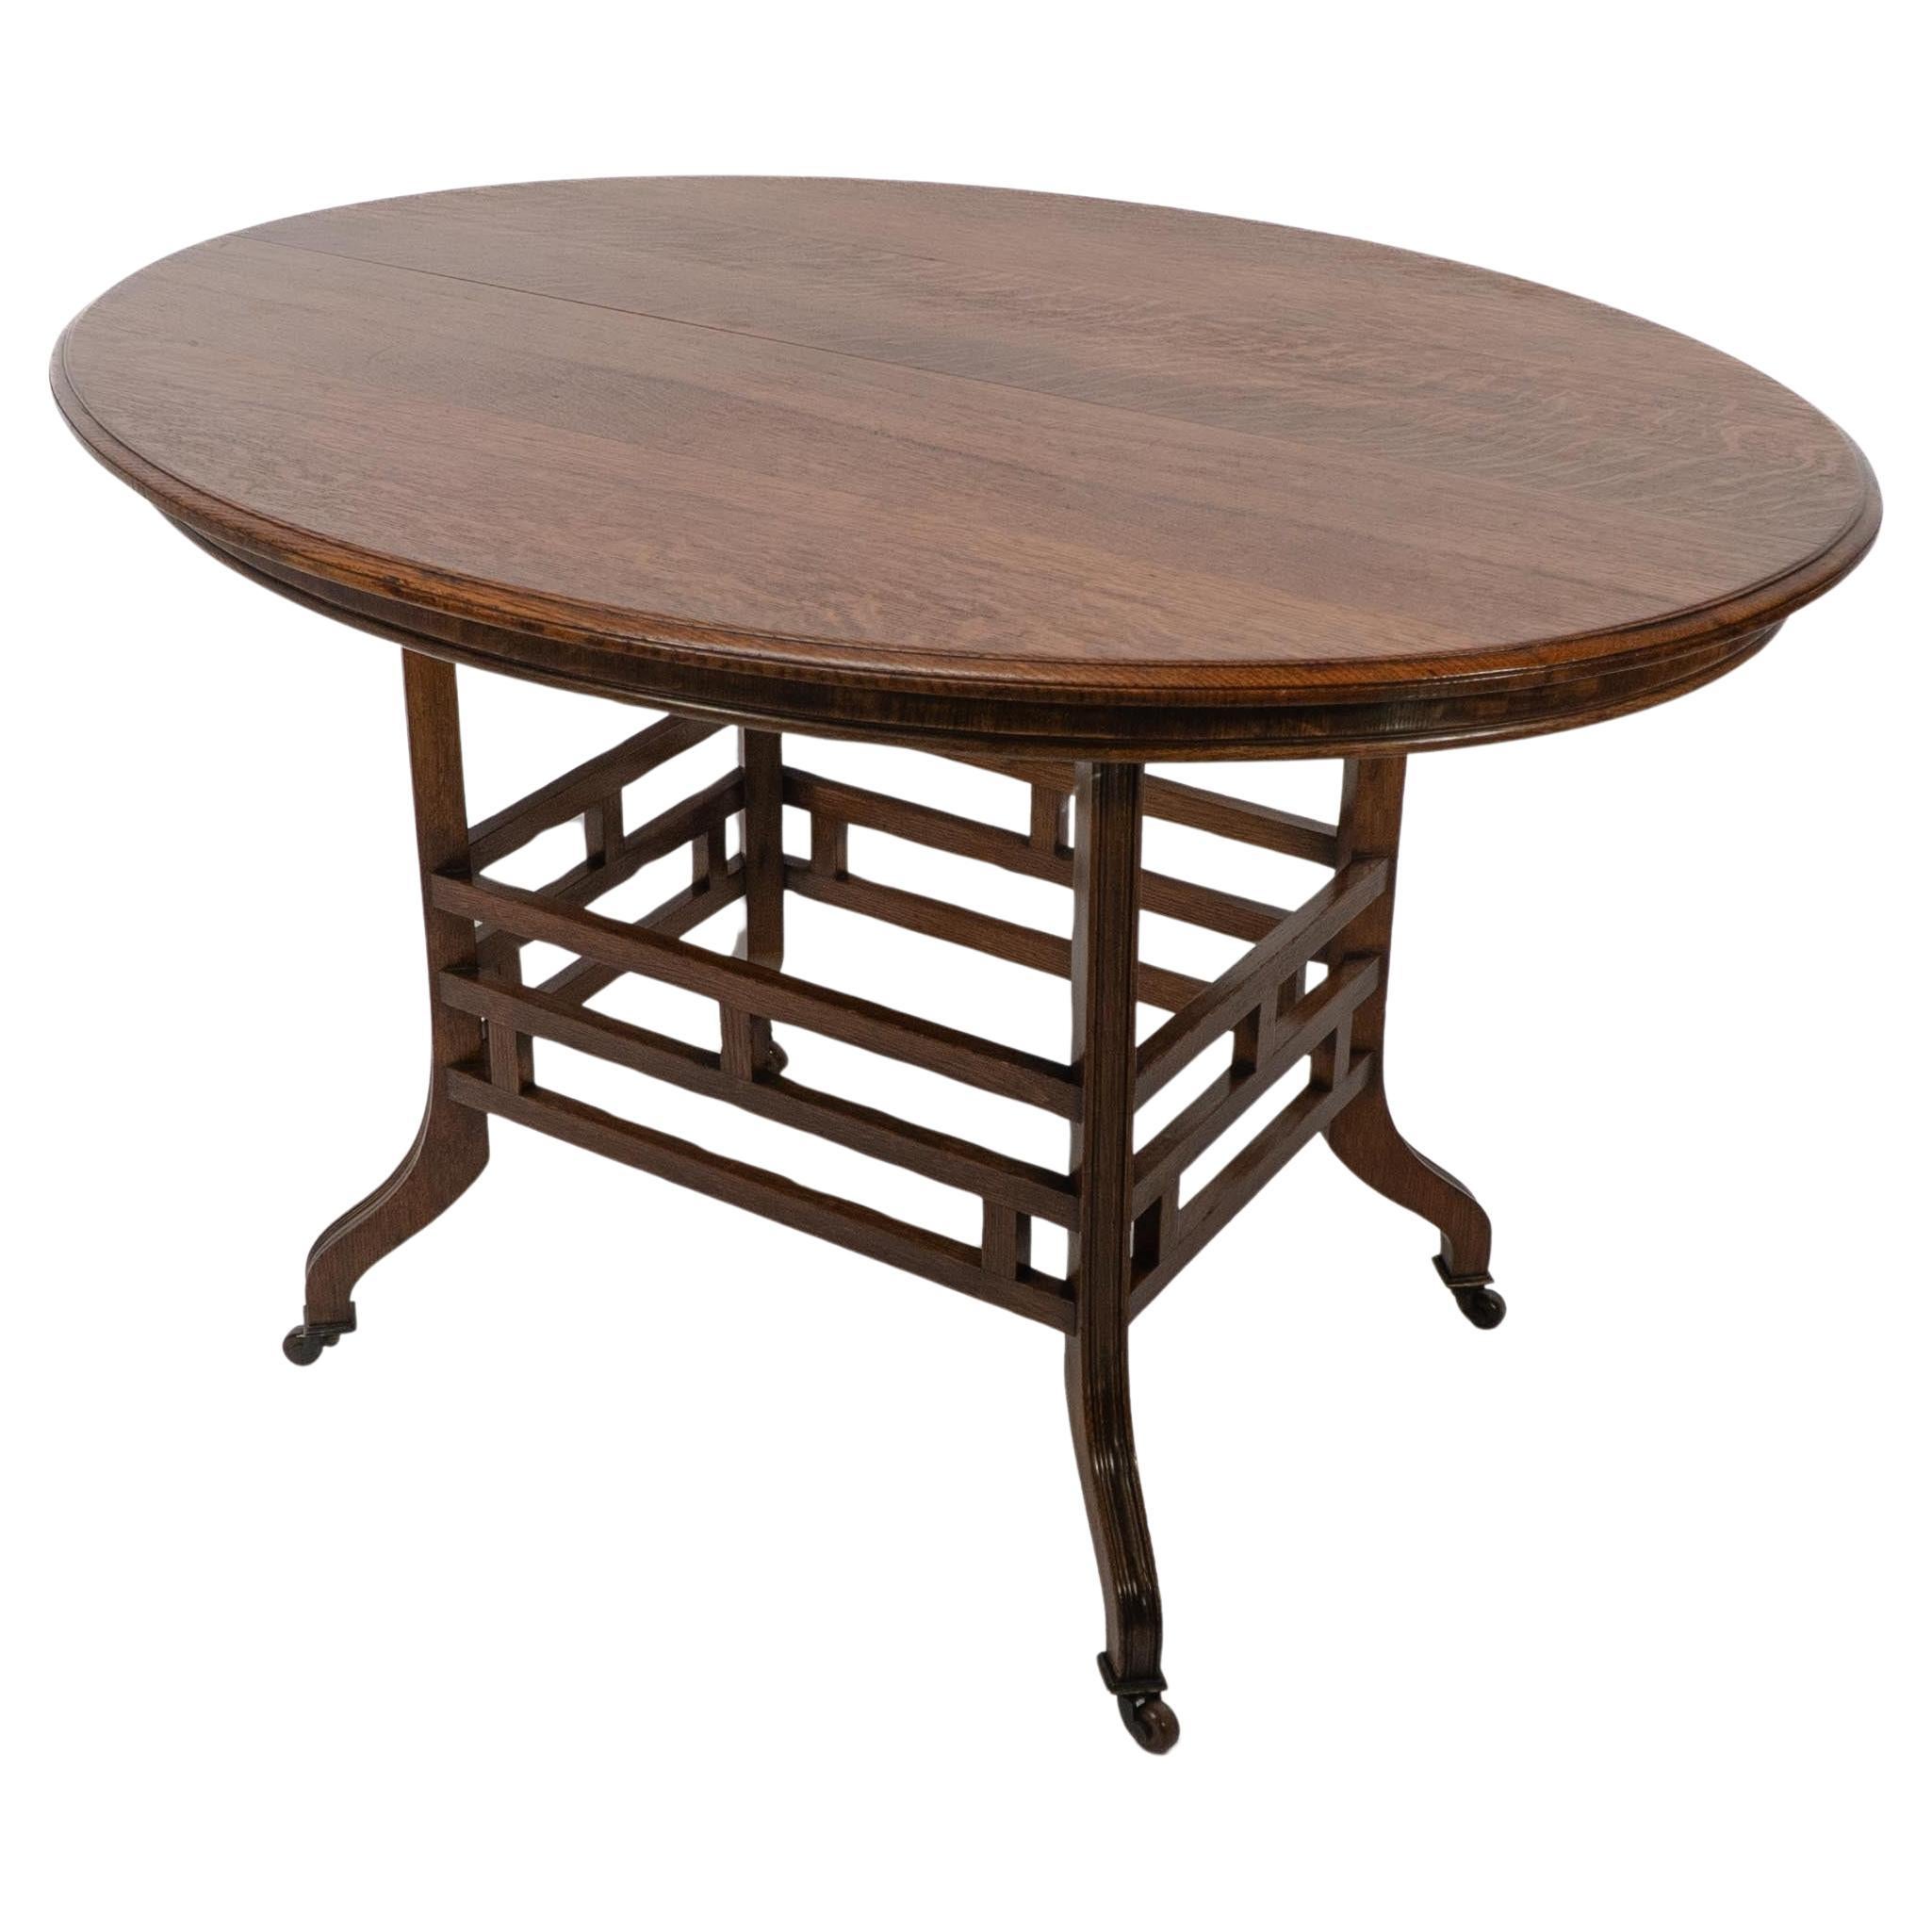 Lambs of Manchester, stamped Lambs. A rare Anglo-Japanese oak oval centre table For Sale